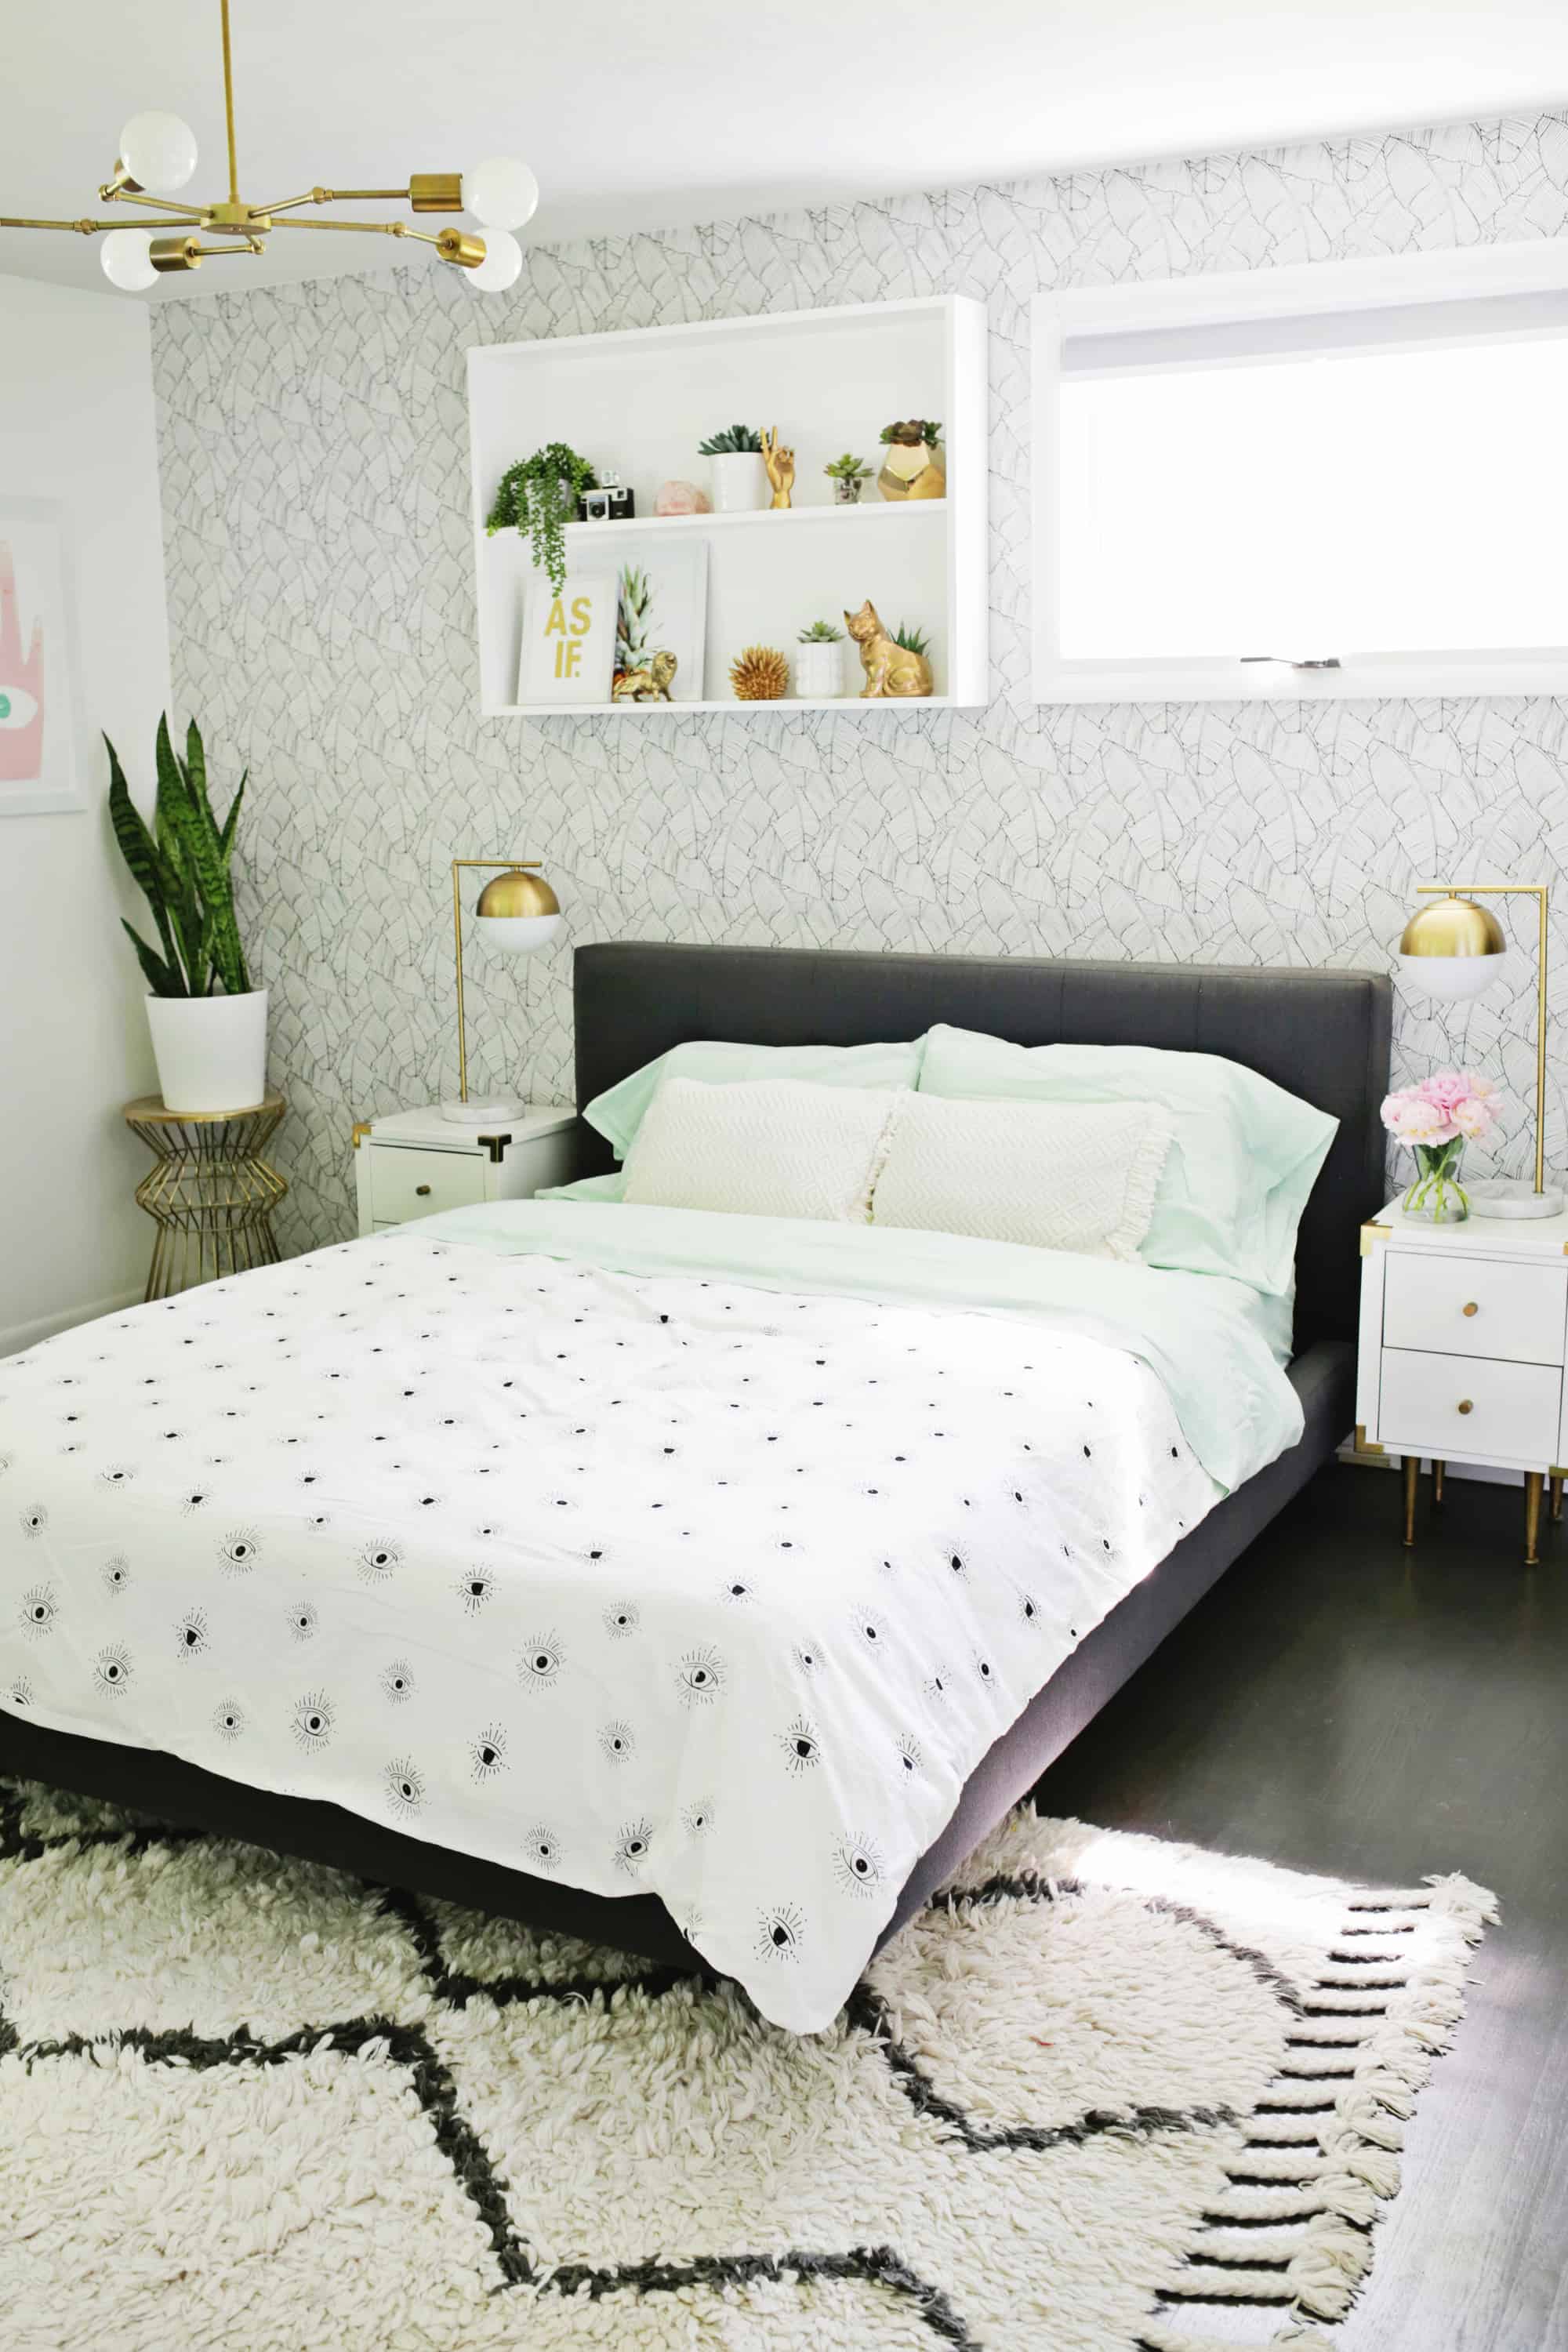 Easy Duvet Cover With Any Flat Sheet, Putting A Duvet Cover On Comforter